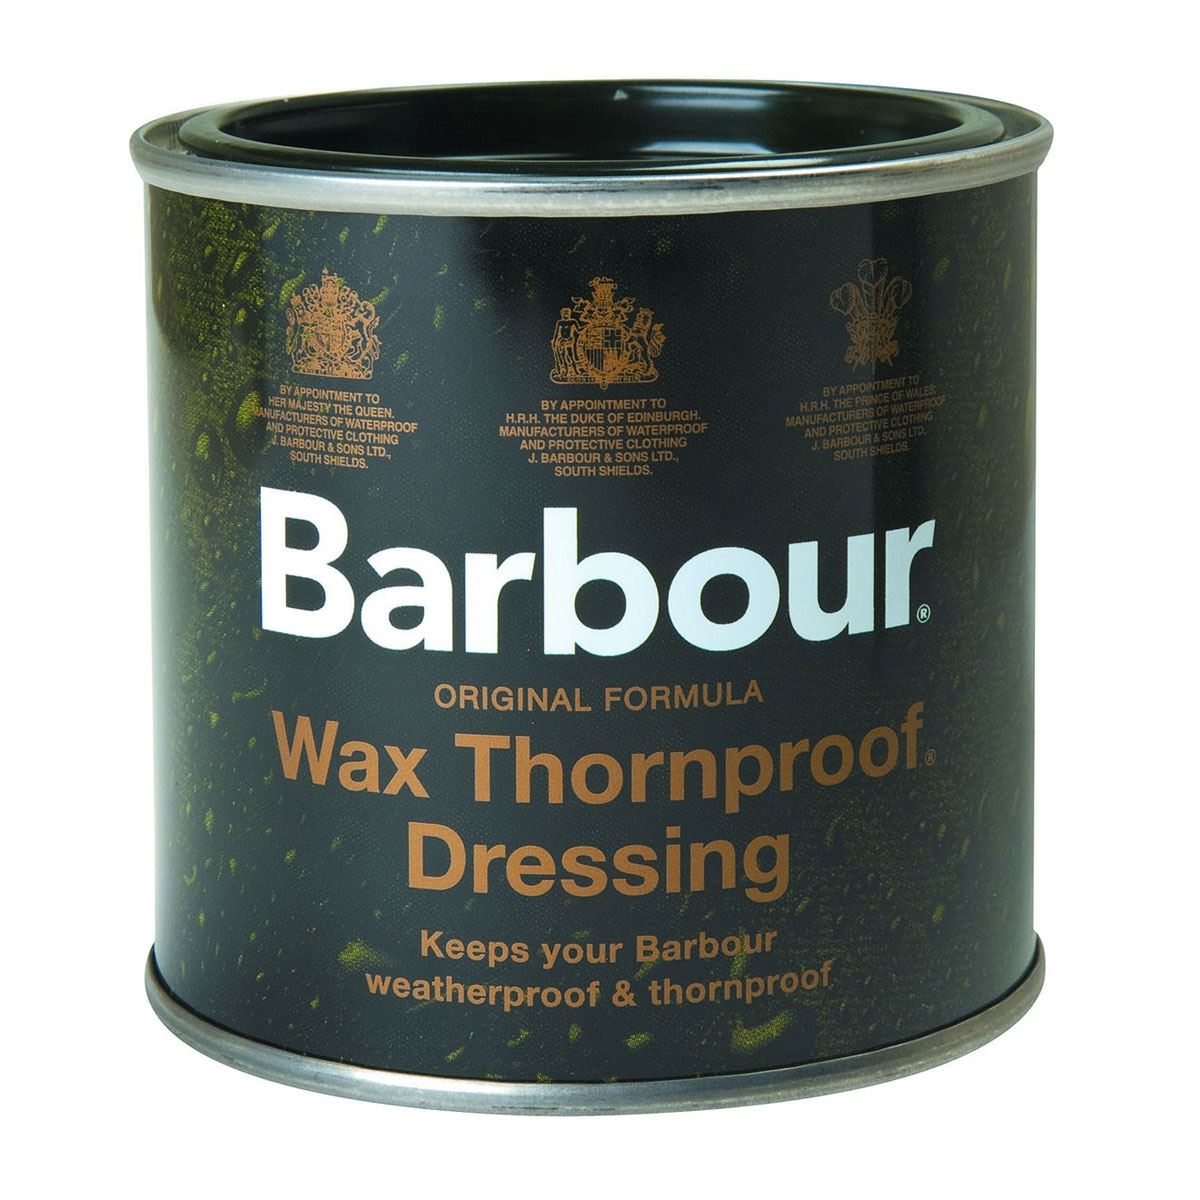 What is the durability of Barbour wax jackets treated with Barbour wax dressing?